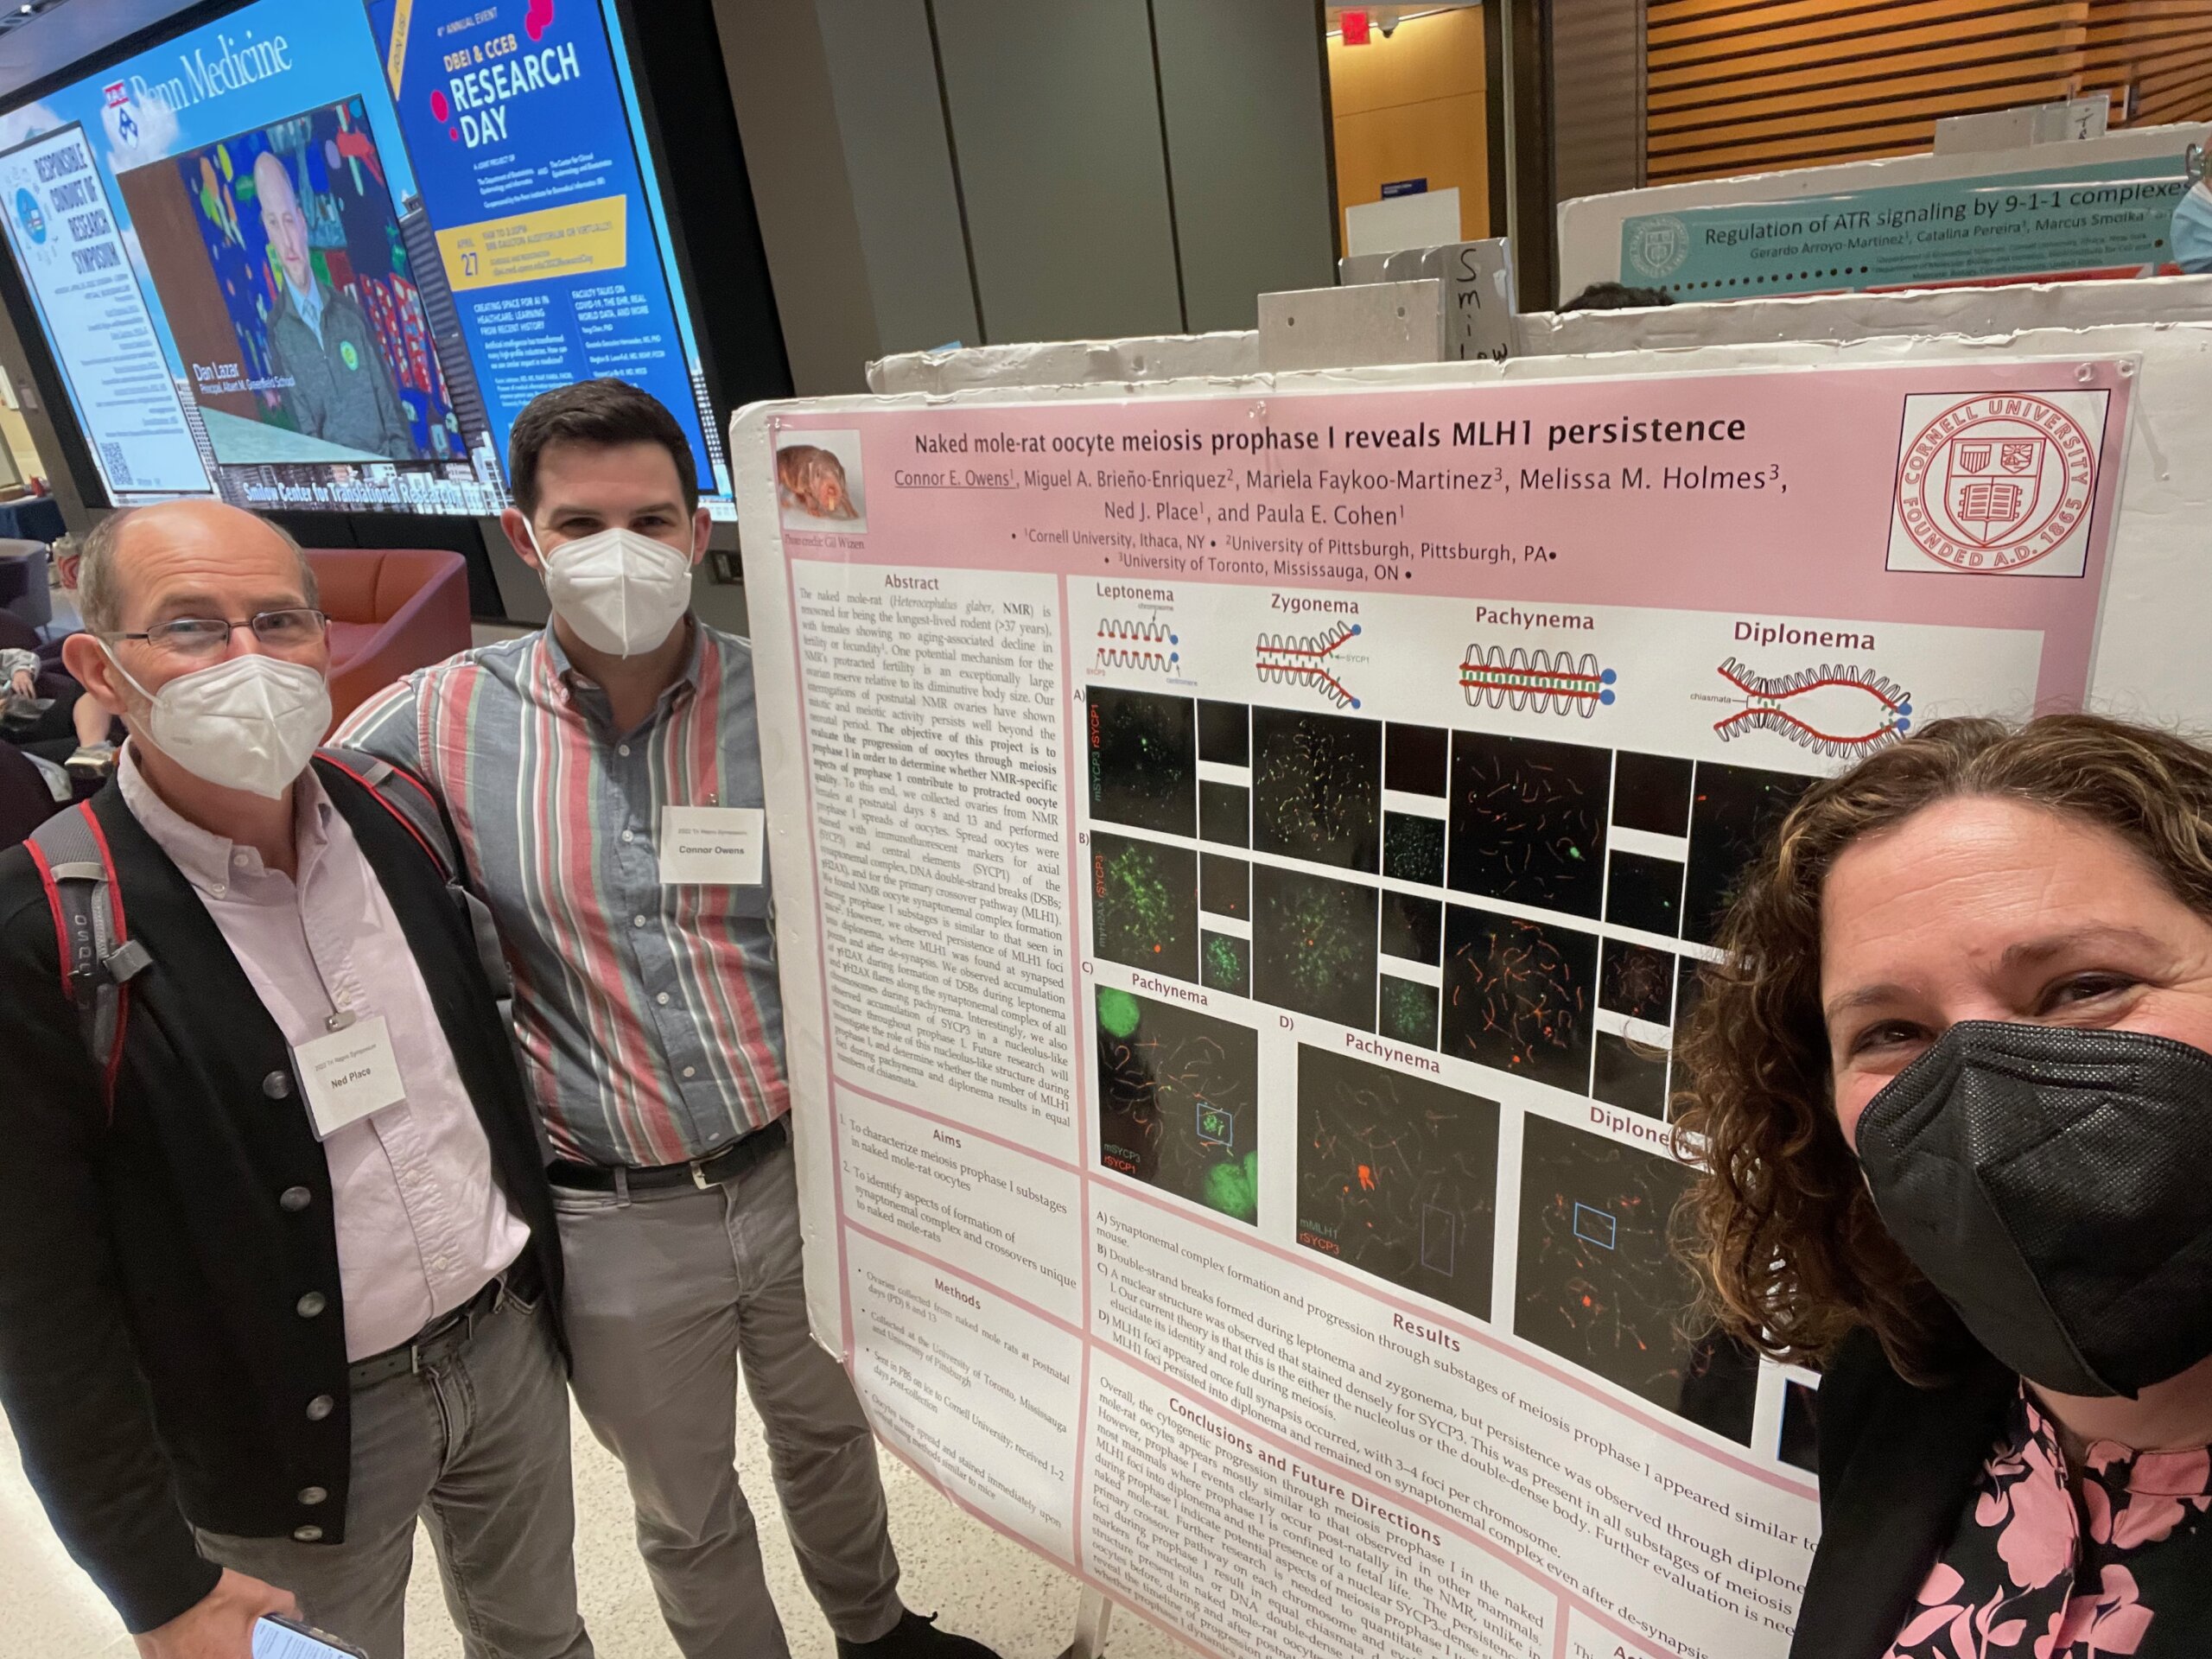 Dr Paula Cohen, Dr Ned Place and Dr Connor Owens in front of “Naked mole-rat oocyte meiosis prophase I reveals MLH1 persistence” poster display